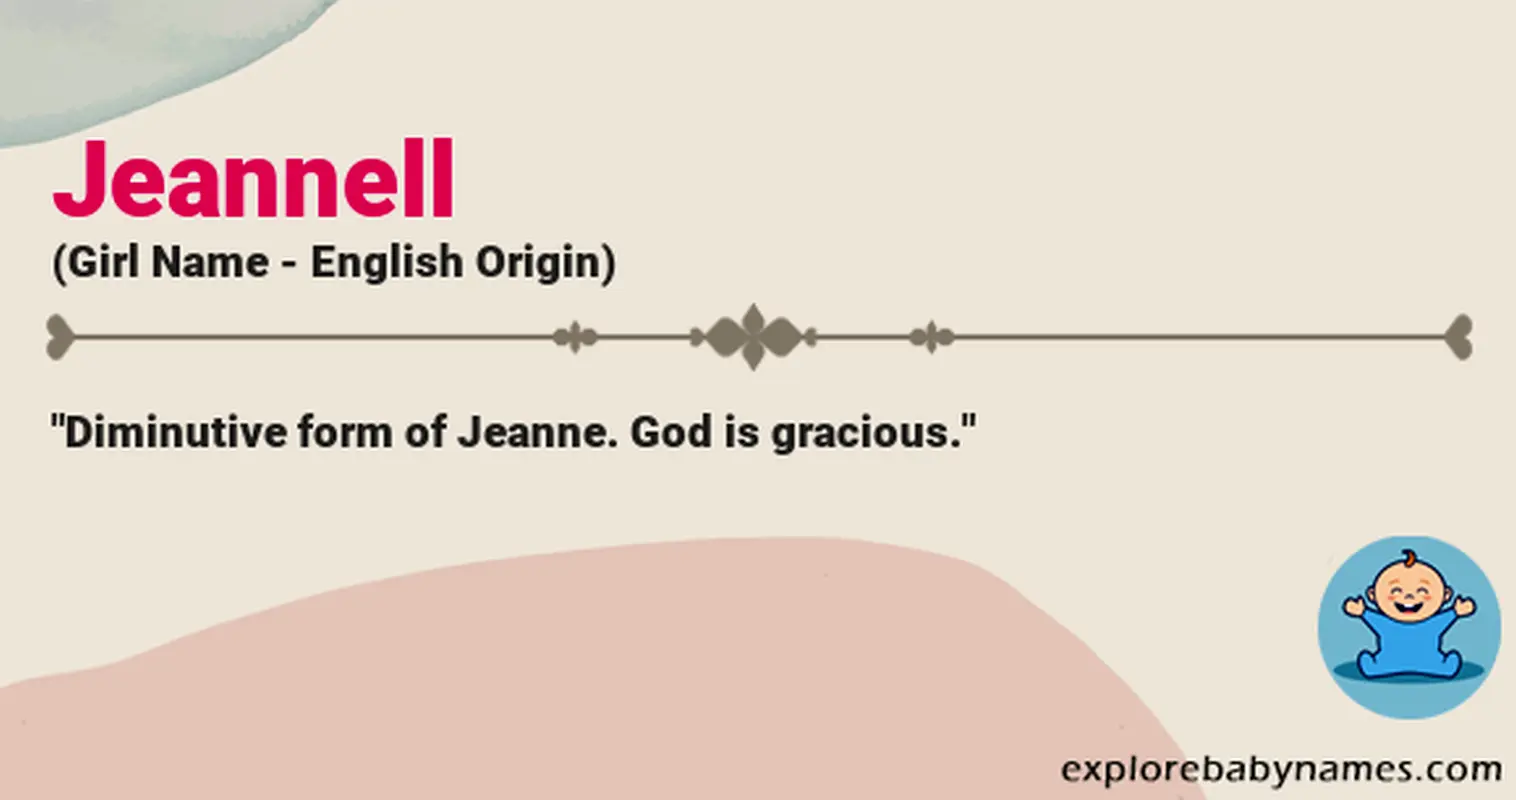 Meaning of Jeannell